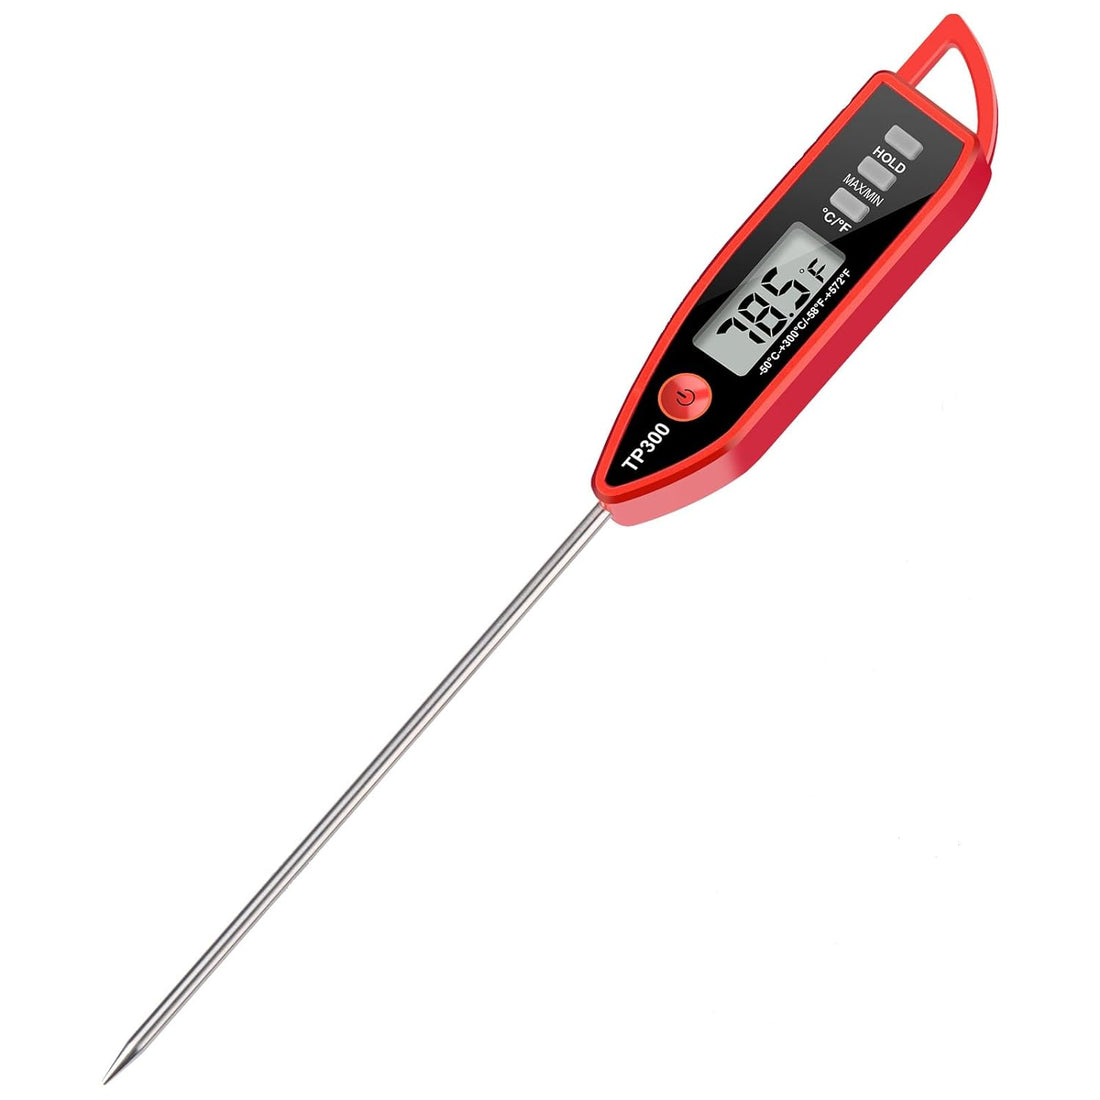 Instant Read Meat Thermometer Food Thermometer Cooking Thermometer Kitchen Candy Thermometer with Fahrenheit/Celsius(ââ€žâ€°/ââ€žÆ’) Switch for Oil Deep Fry BBQ Grill Smoker Thermometer by AikTryee